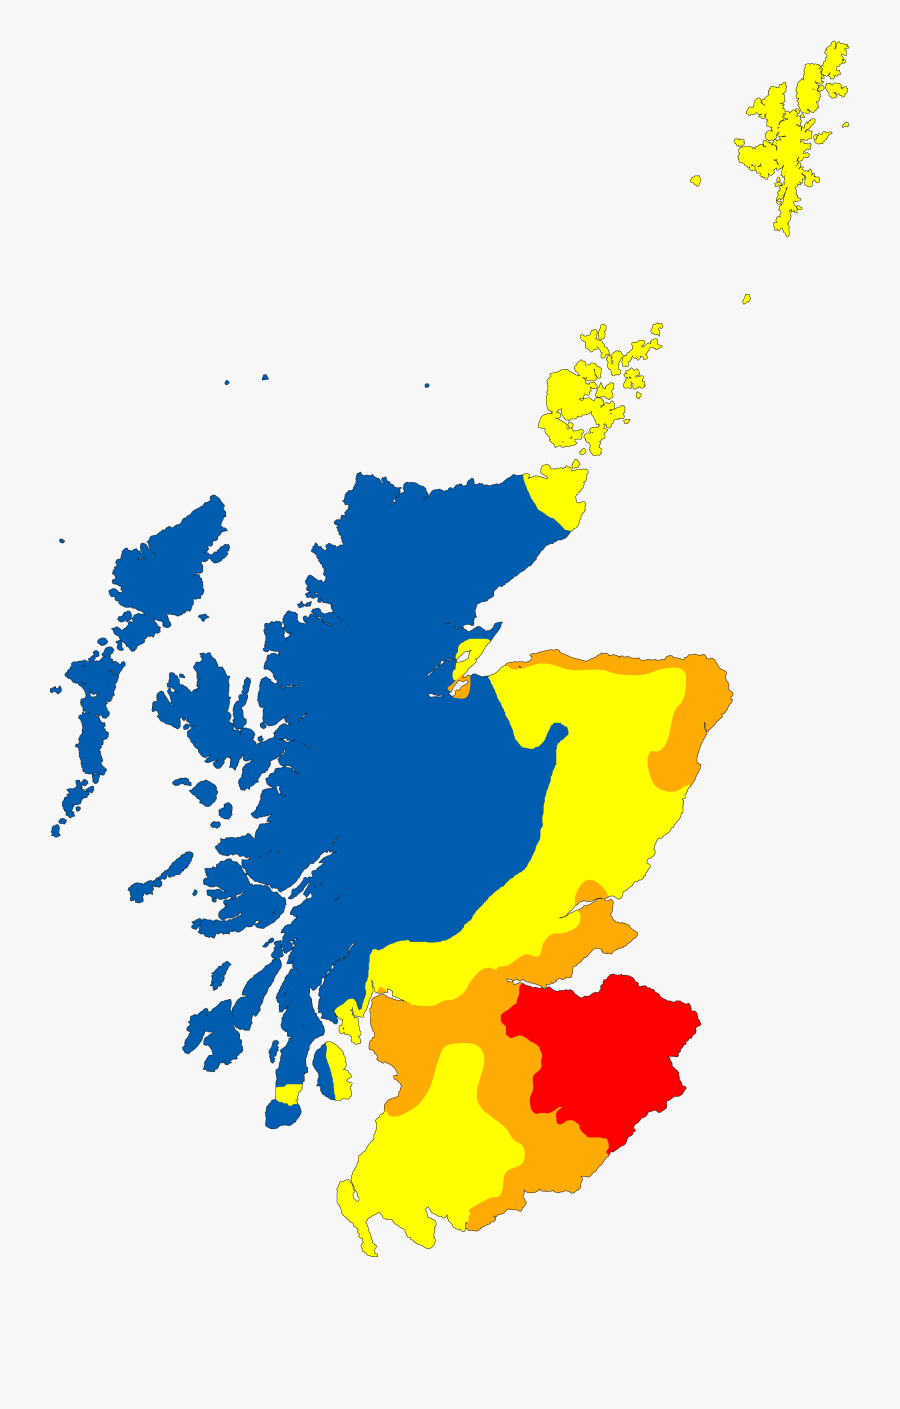 History Of Scots In Scotland - Average Life Expectancy Scotland, Transparent Clipart